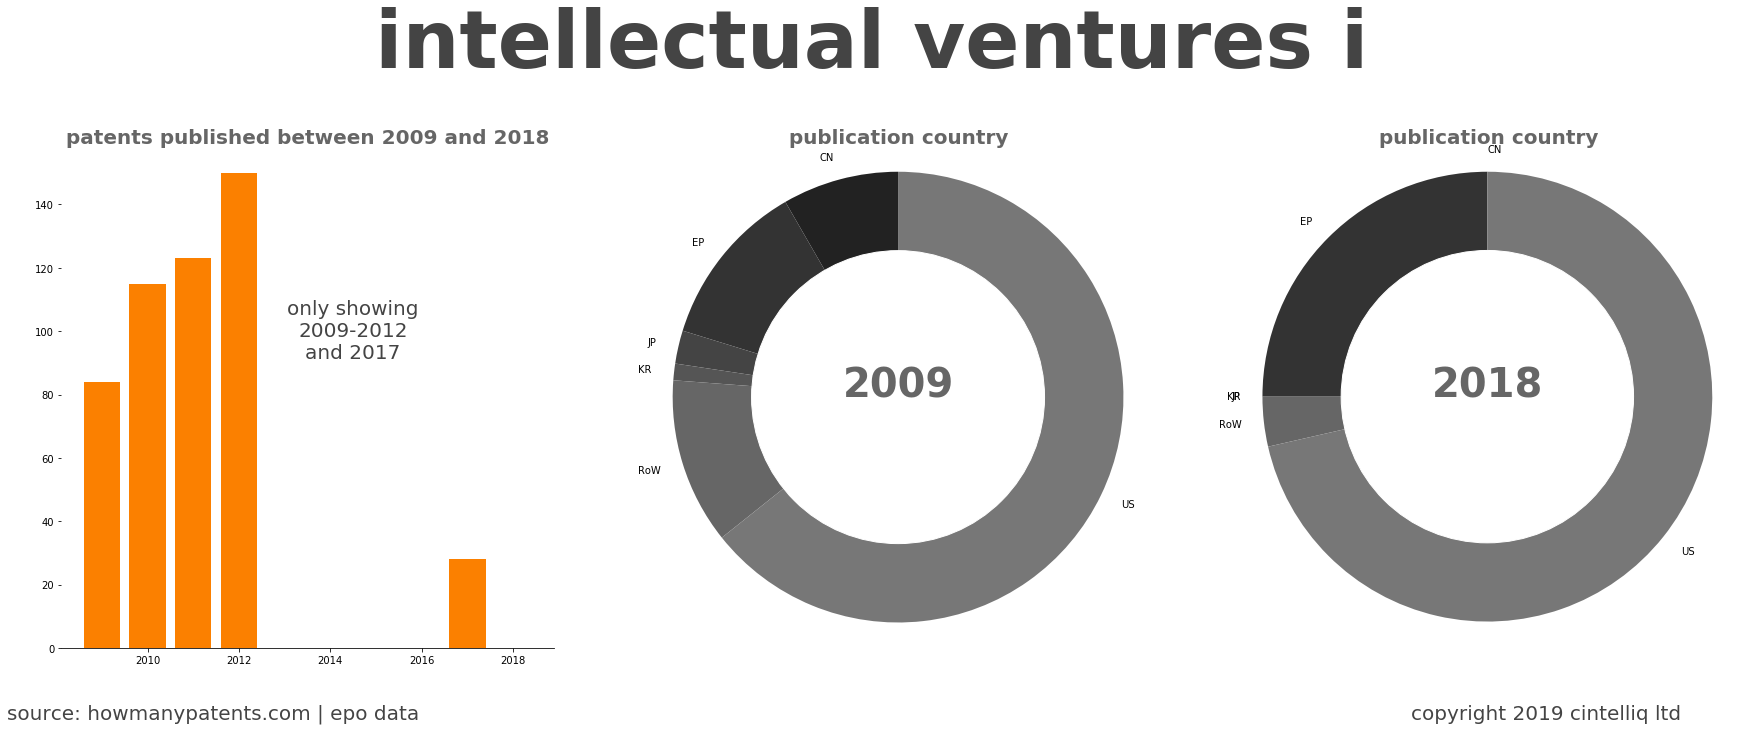 summary of patents for Intellectual Ventures I